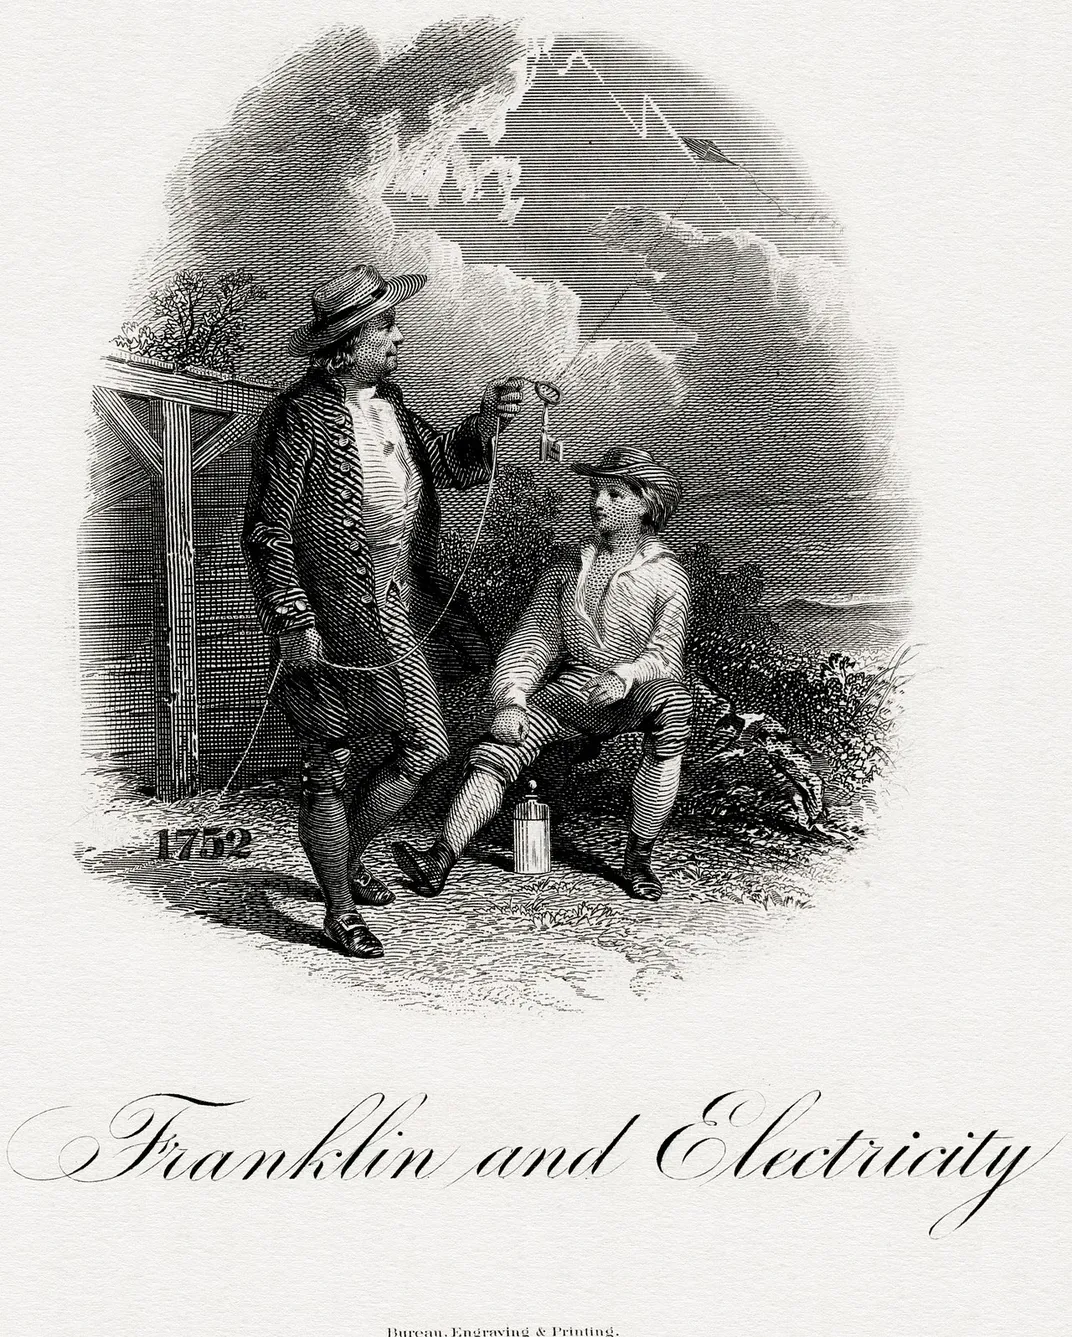 Bureau of Engraving and Printing engraved vignette titled Franklin and Electricity